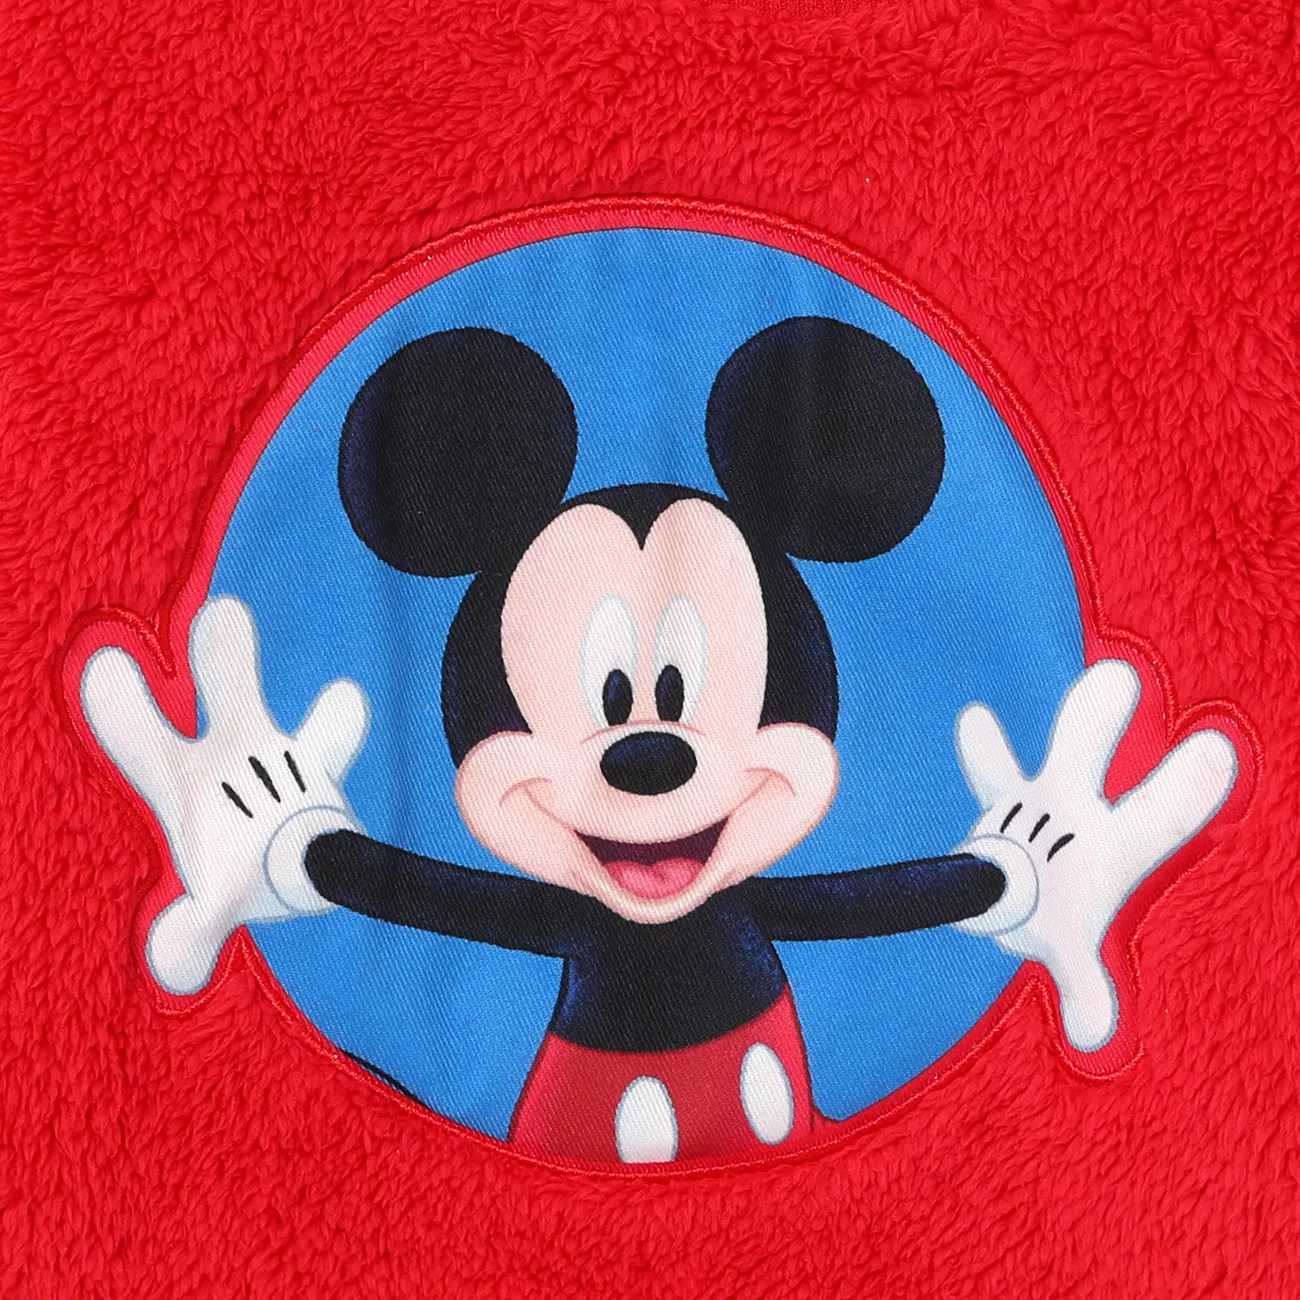 Disney Mickey and Friends Toddler Girl/Boy Character Embroidered Long-sleeve Fluffy Sweatshirt Red big image 1